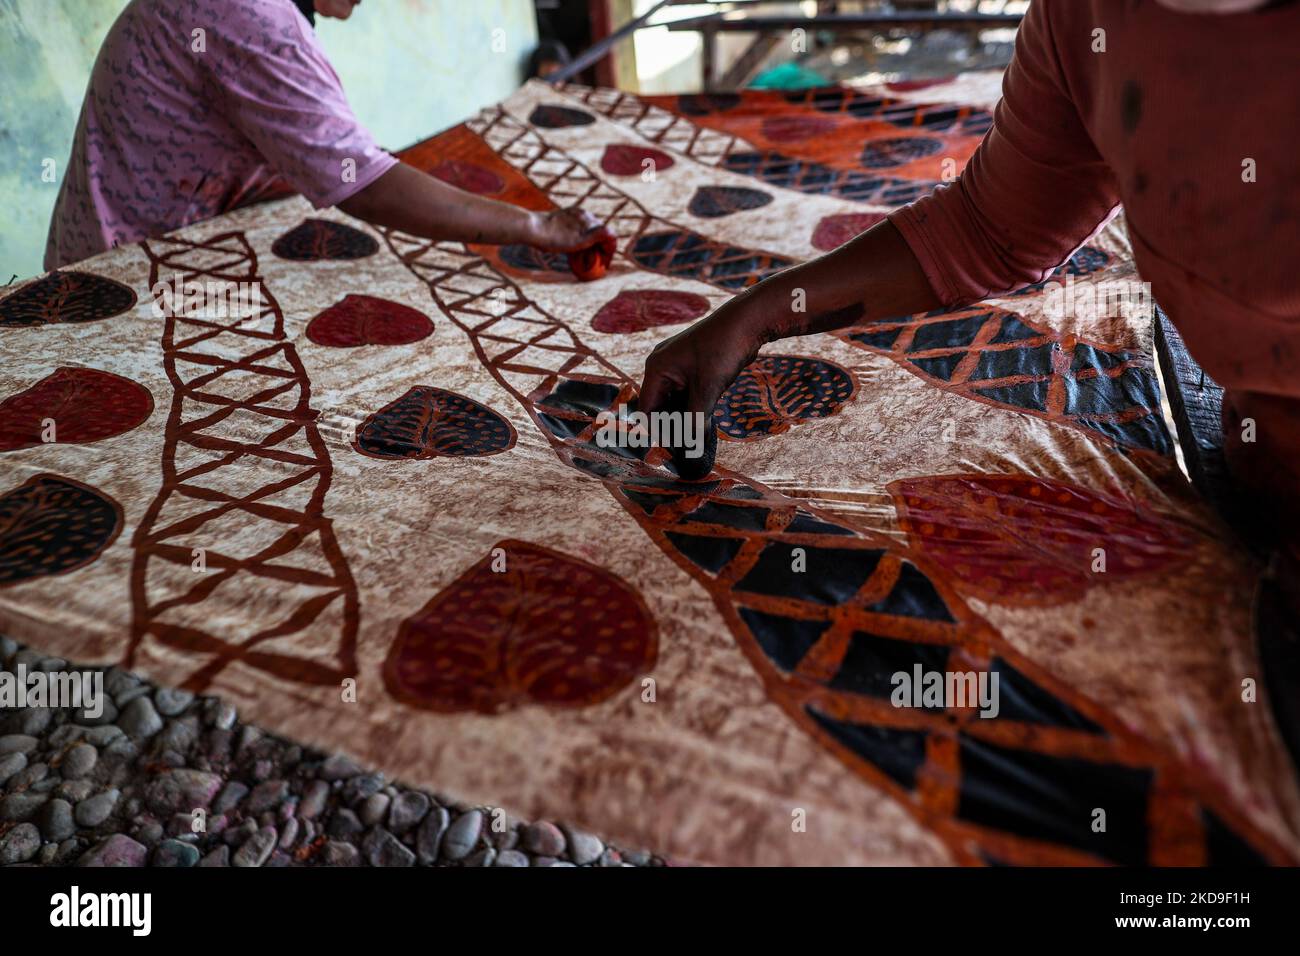 Workers making batik cloth pattern with a wax-resist cloth dyeing technique onto traditional Javanese textile called batik at low-lying Jeruk Sari neighborhood in coastal Pekalongan, Central Java, Indonesia, June 5, 2021. An area in which almost every available space is used for batik production, with a high level of poverty, vulnerable to both rising sea levels and high river peak flows. Pekalongan is a city known for batik, a traditional Indonesian method of using wax to resist water-based dyes to depict patterns and drawings, usually on fabric. This textile has traditionally been crafted by Stock Photo